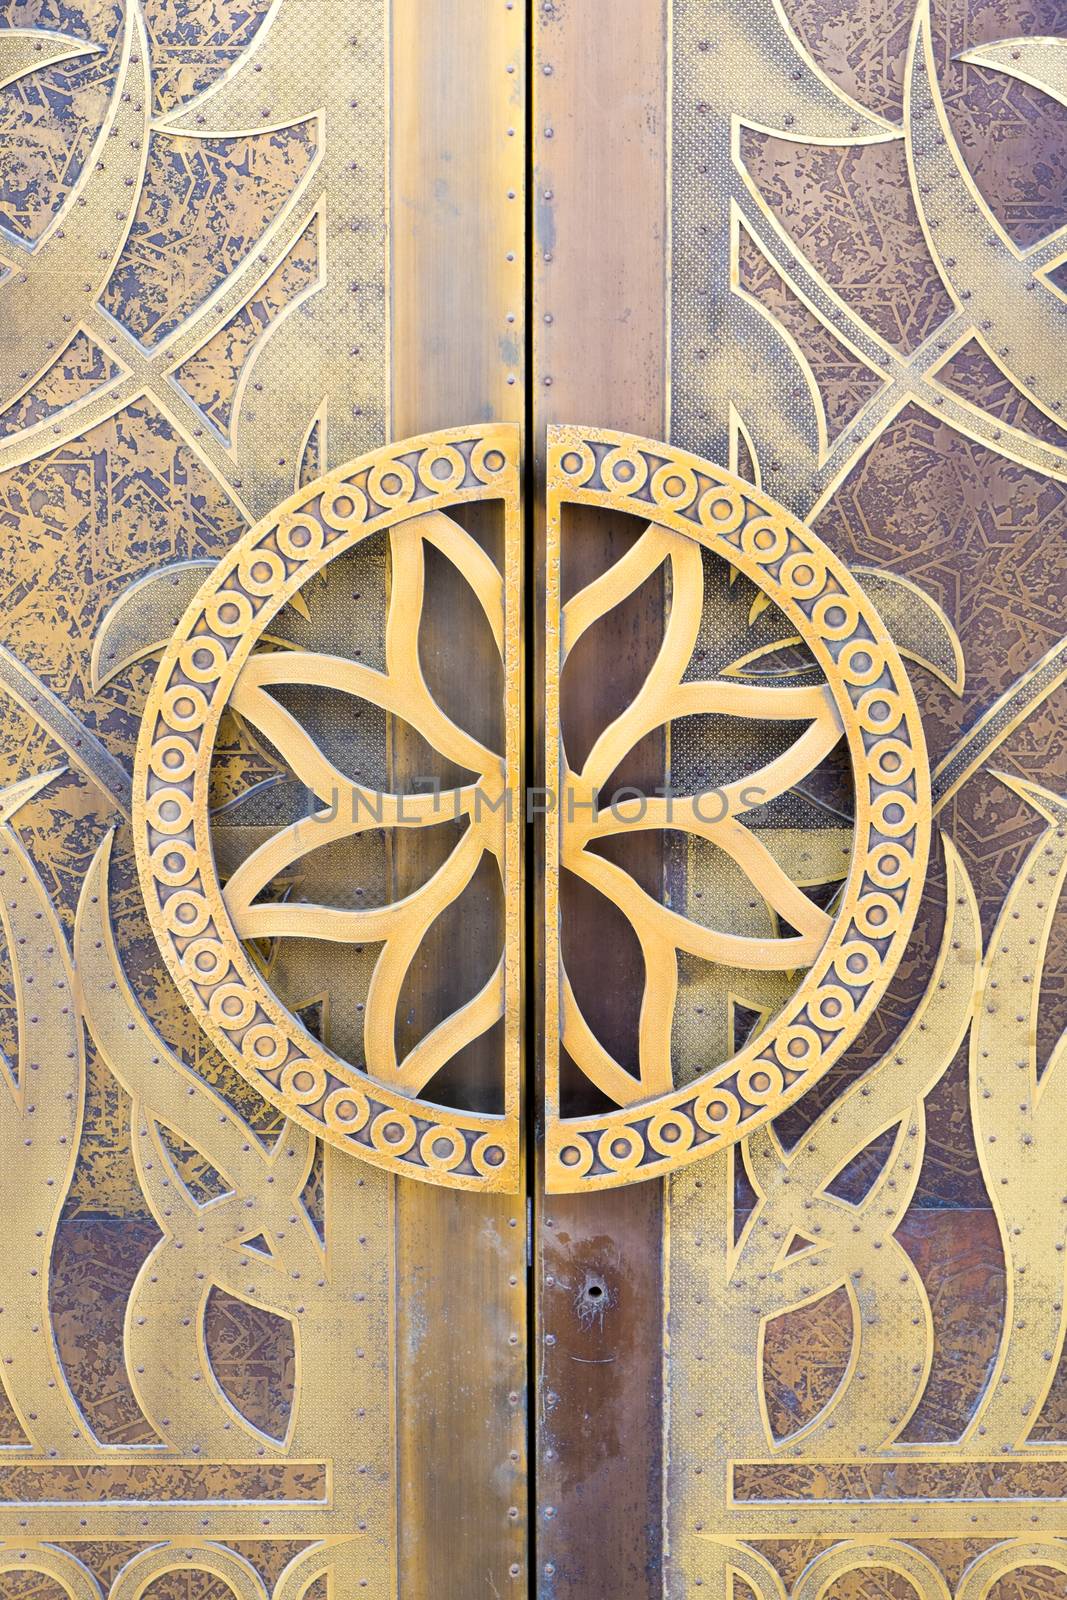 Detail of a Door to a mosque decorated with gold in Dubai.